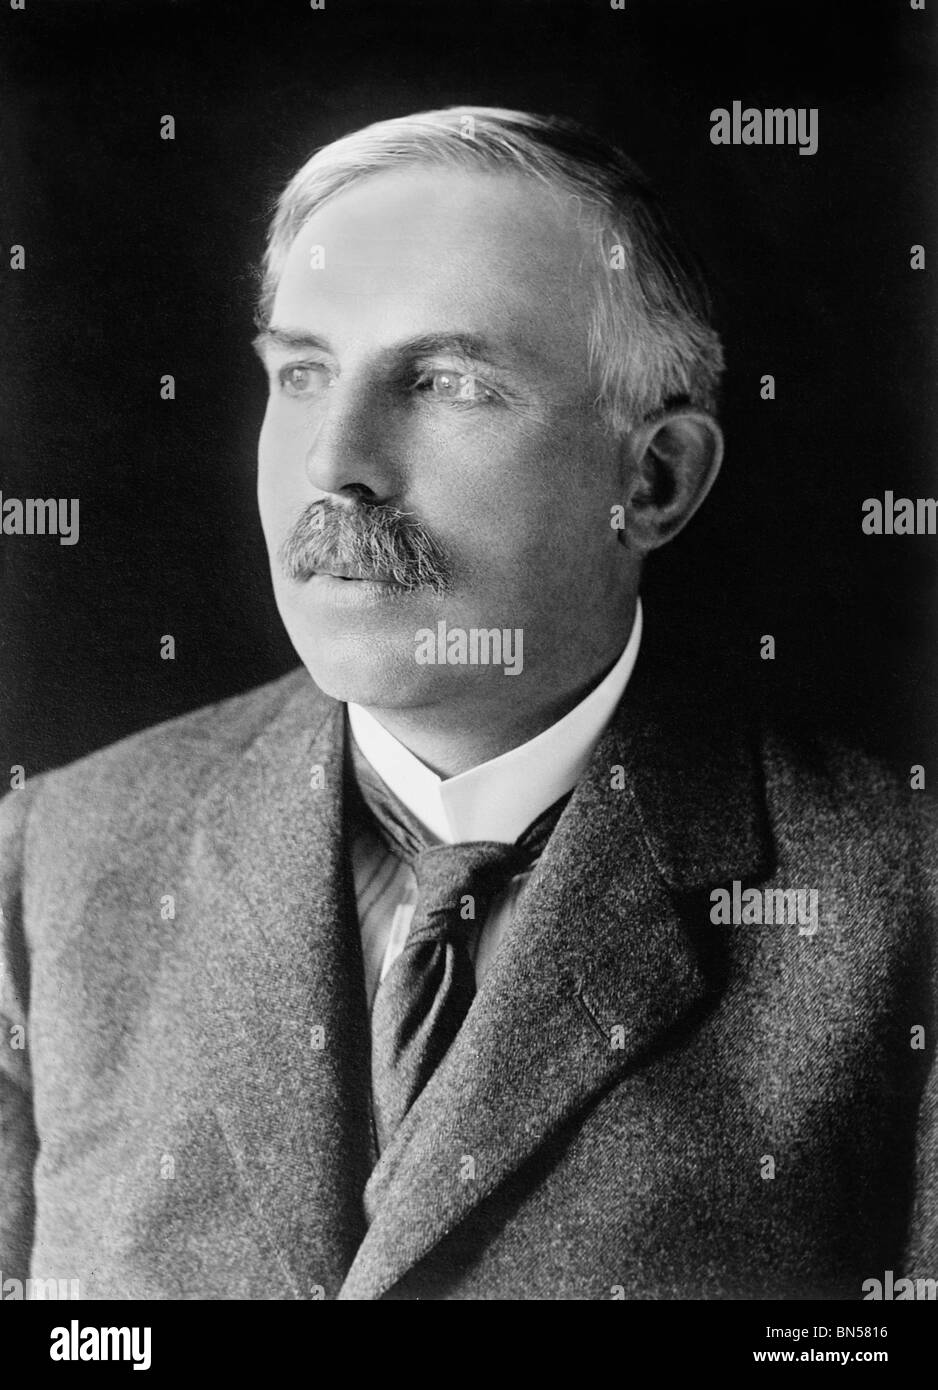 Photo of scientist Ernest Rutherford (1871 - 1937) - winner of the 1908 Nobel Prize in Chemistry + 'father' of nuclear physics. Stock Photo